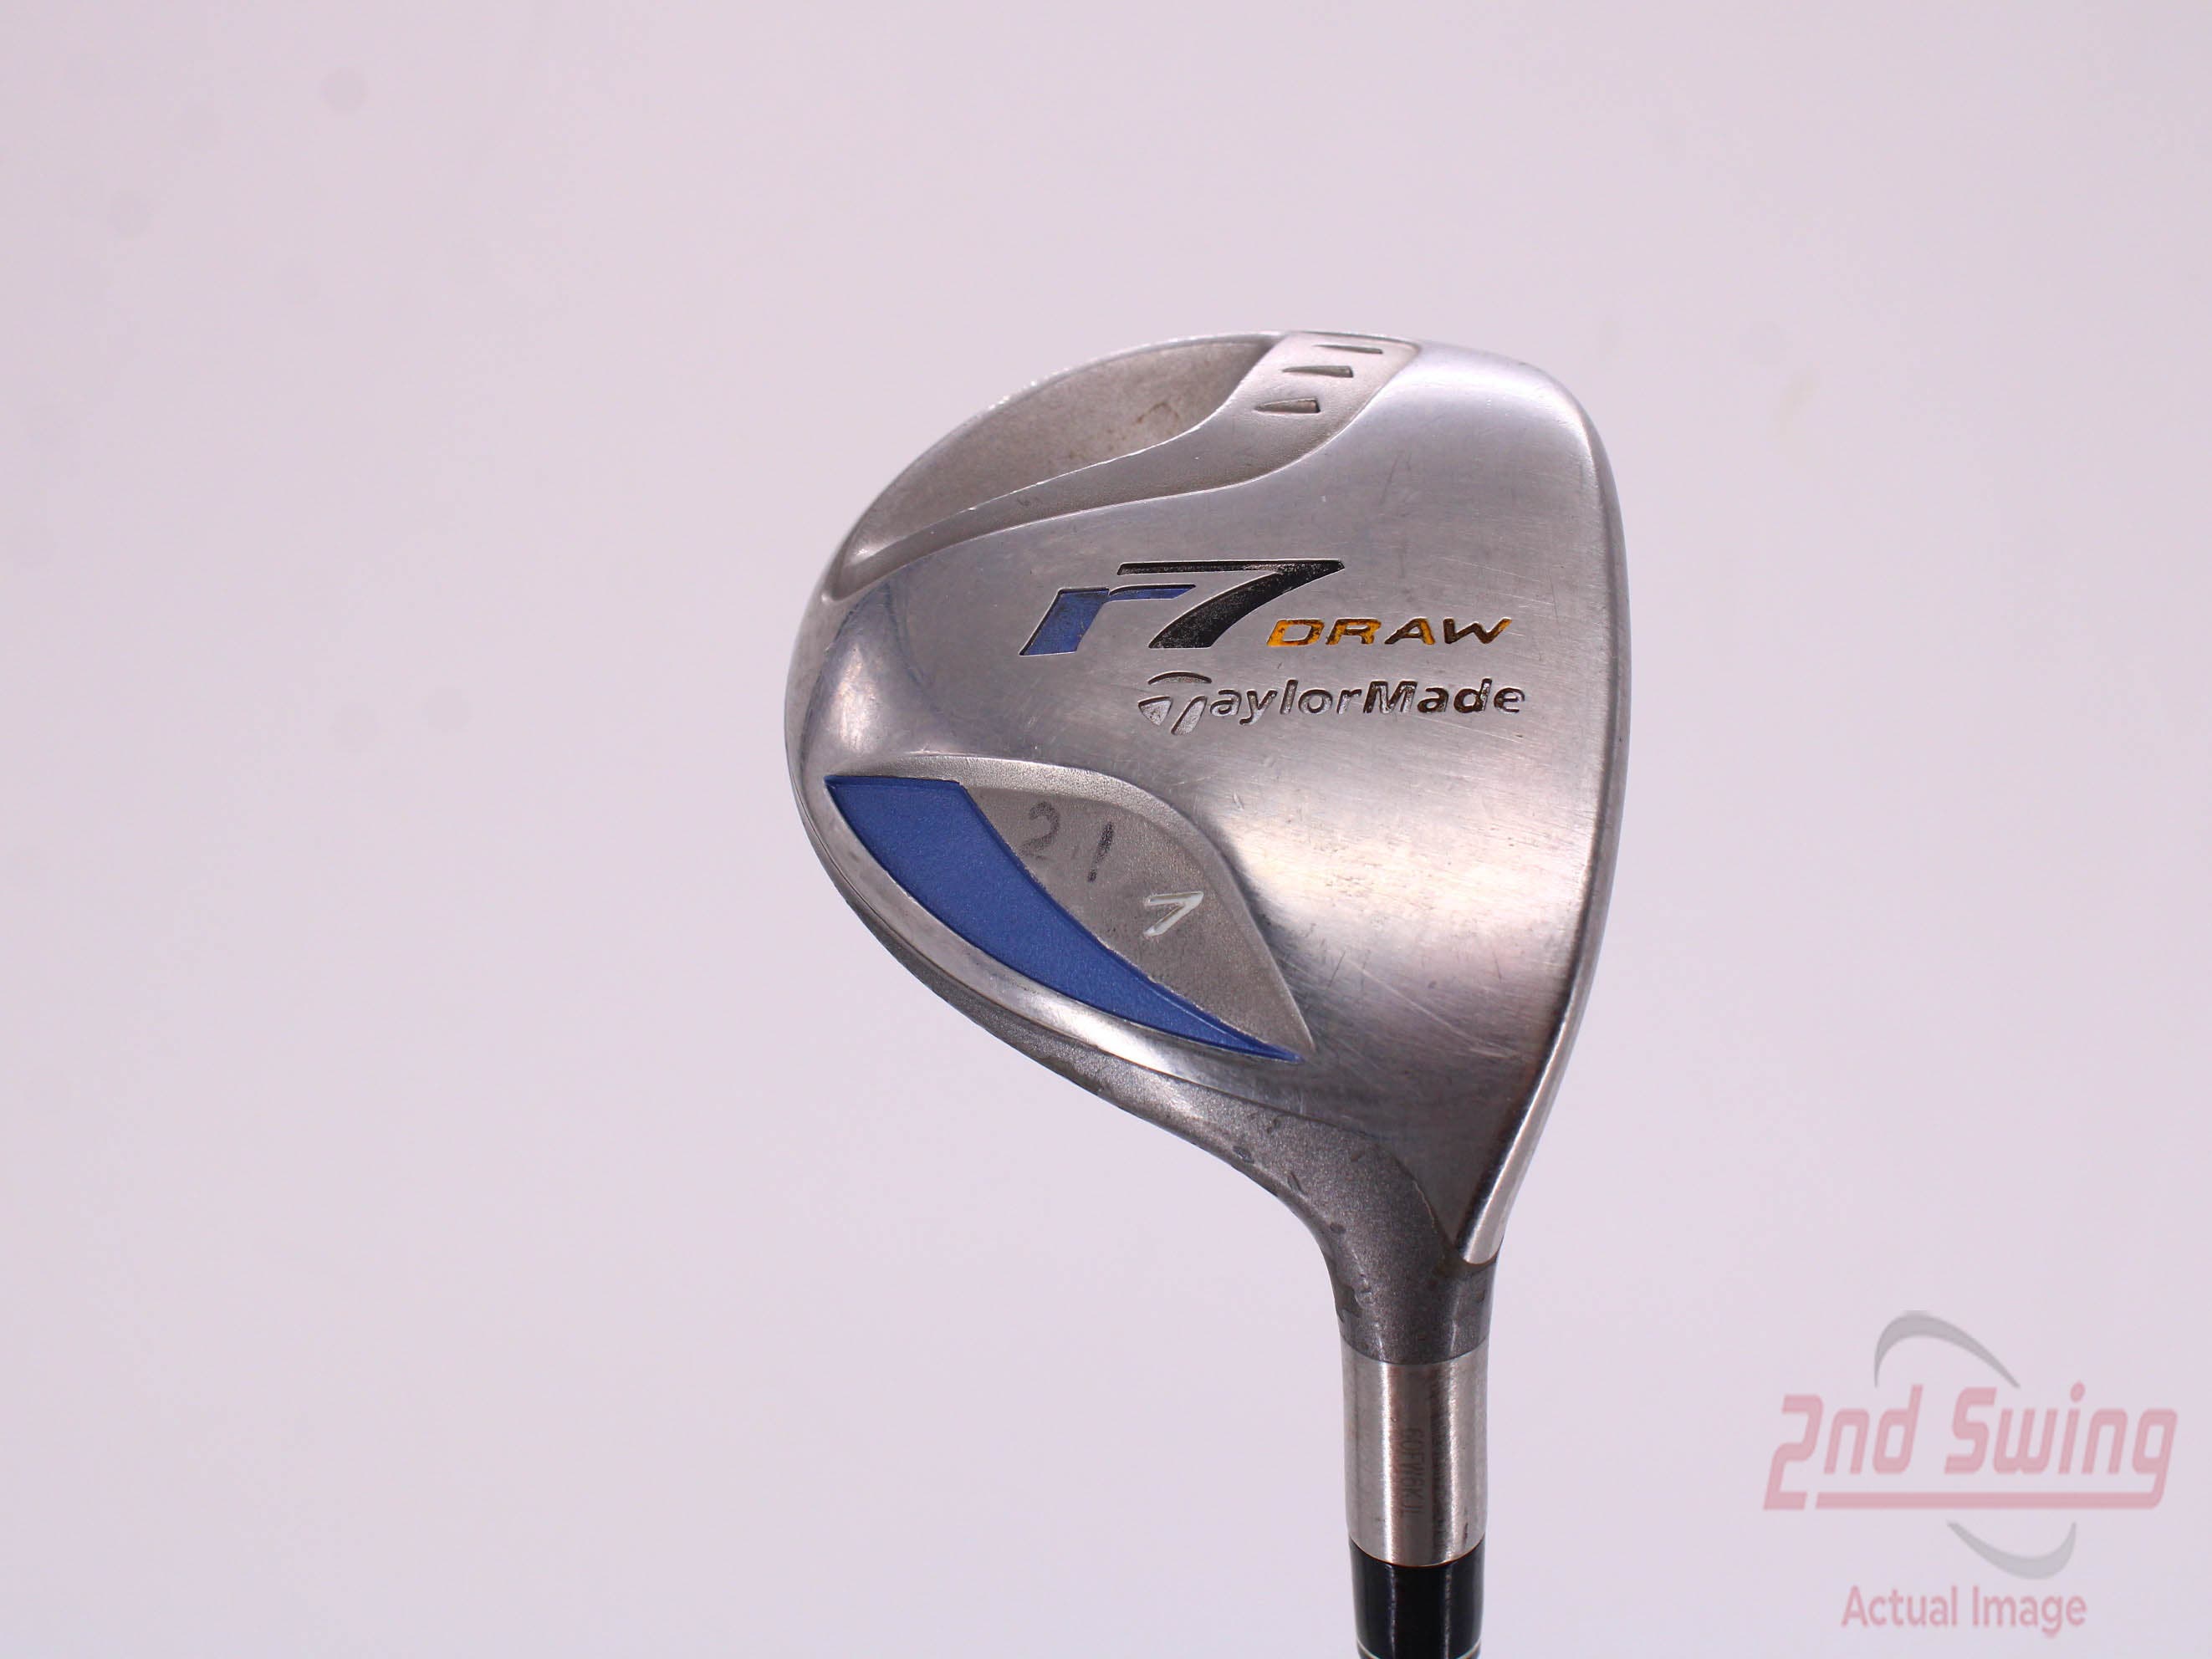 TaylorMade Taylormade r7 draw 5 wood 